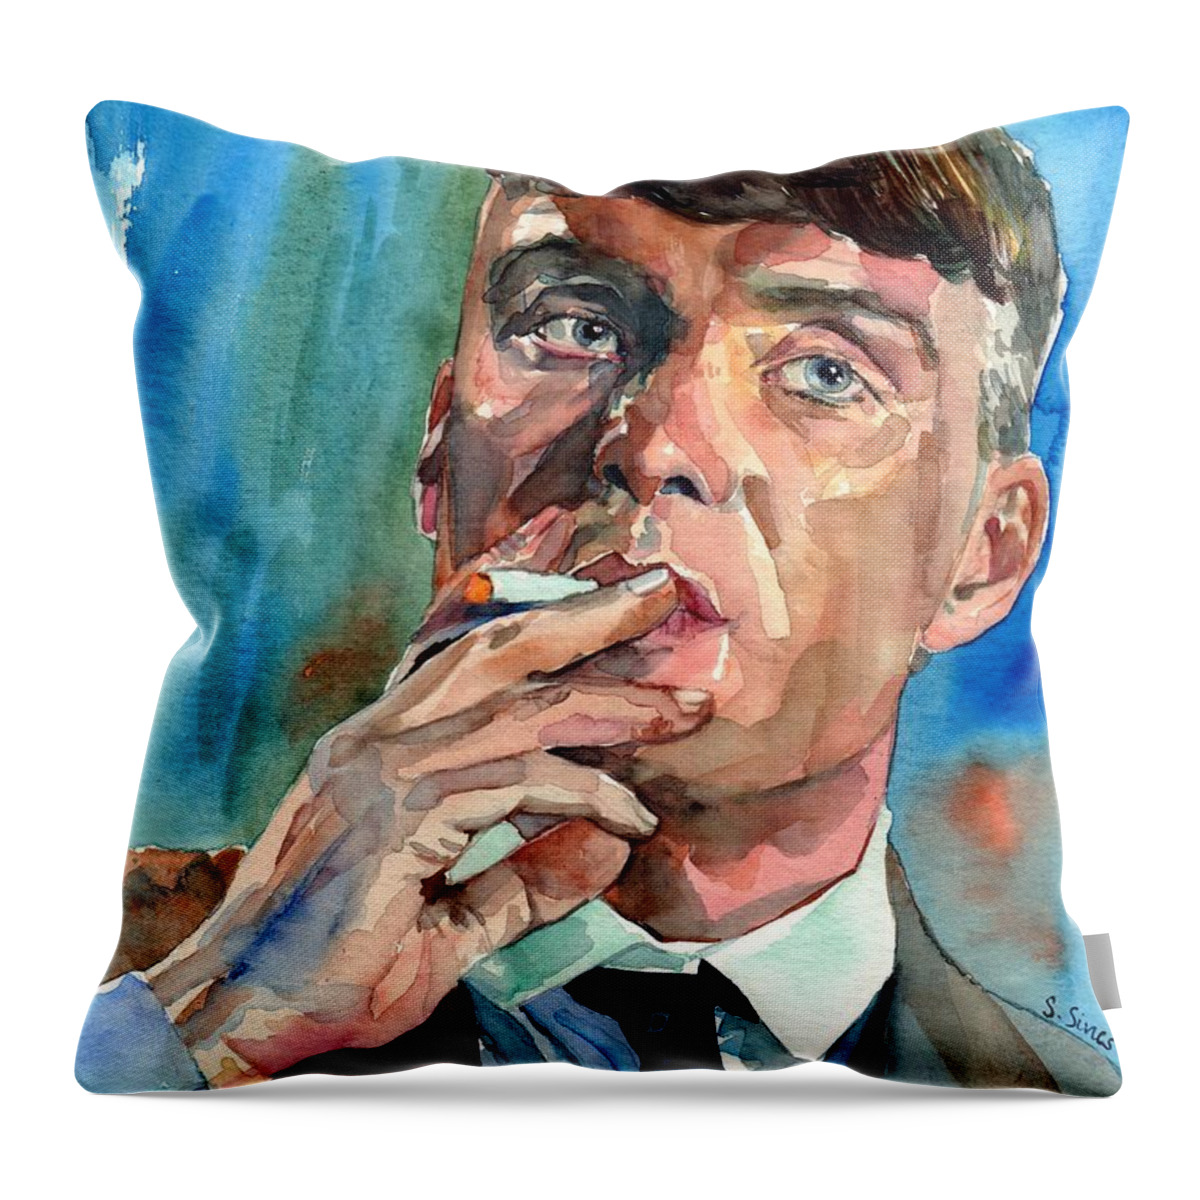 Cillian Murphy Throw Pillow featuring the painting Cillian Murphy Portrait by Suzann Sines